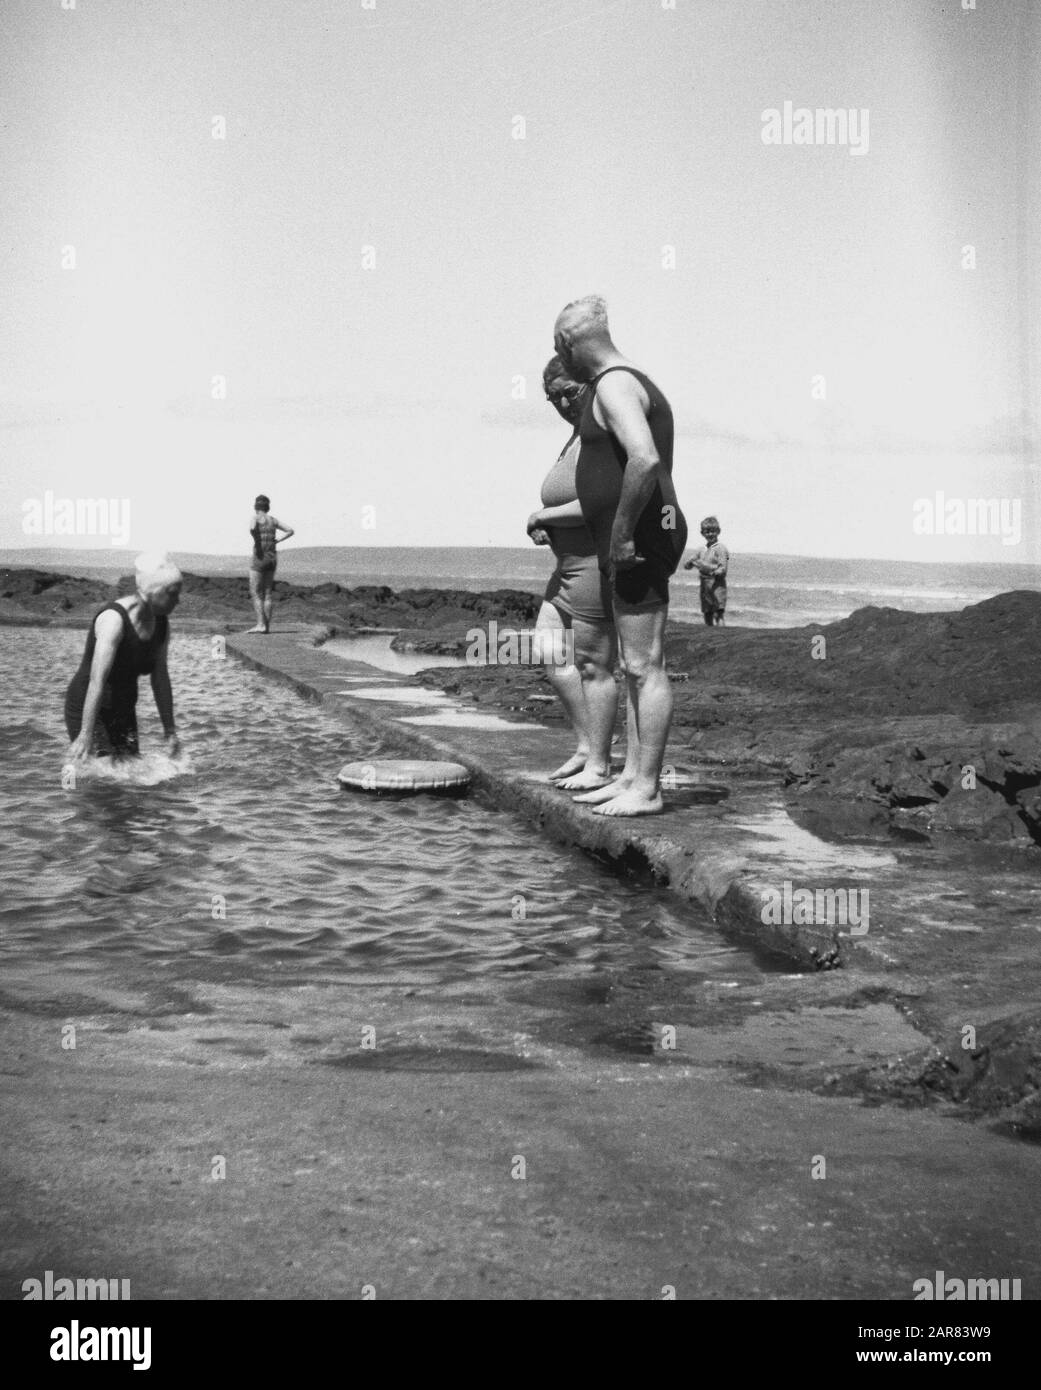 1930s, historical, male and female adult bathers in the swimming costumes of the era in a sea pool at the coast, Bideford, Devon, England, UK. Partially man-made open-air tidal swimming or paddling pools of sea water built by rocks were a feature seen at coastal areas in Devon and Cornwall. Stock Photo